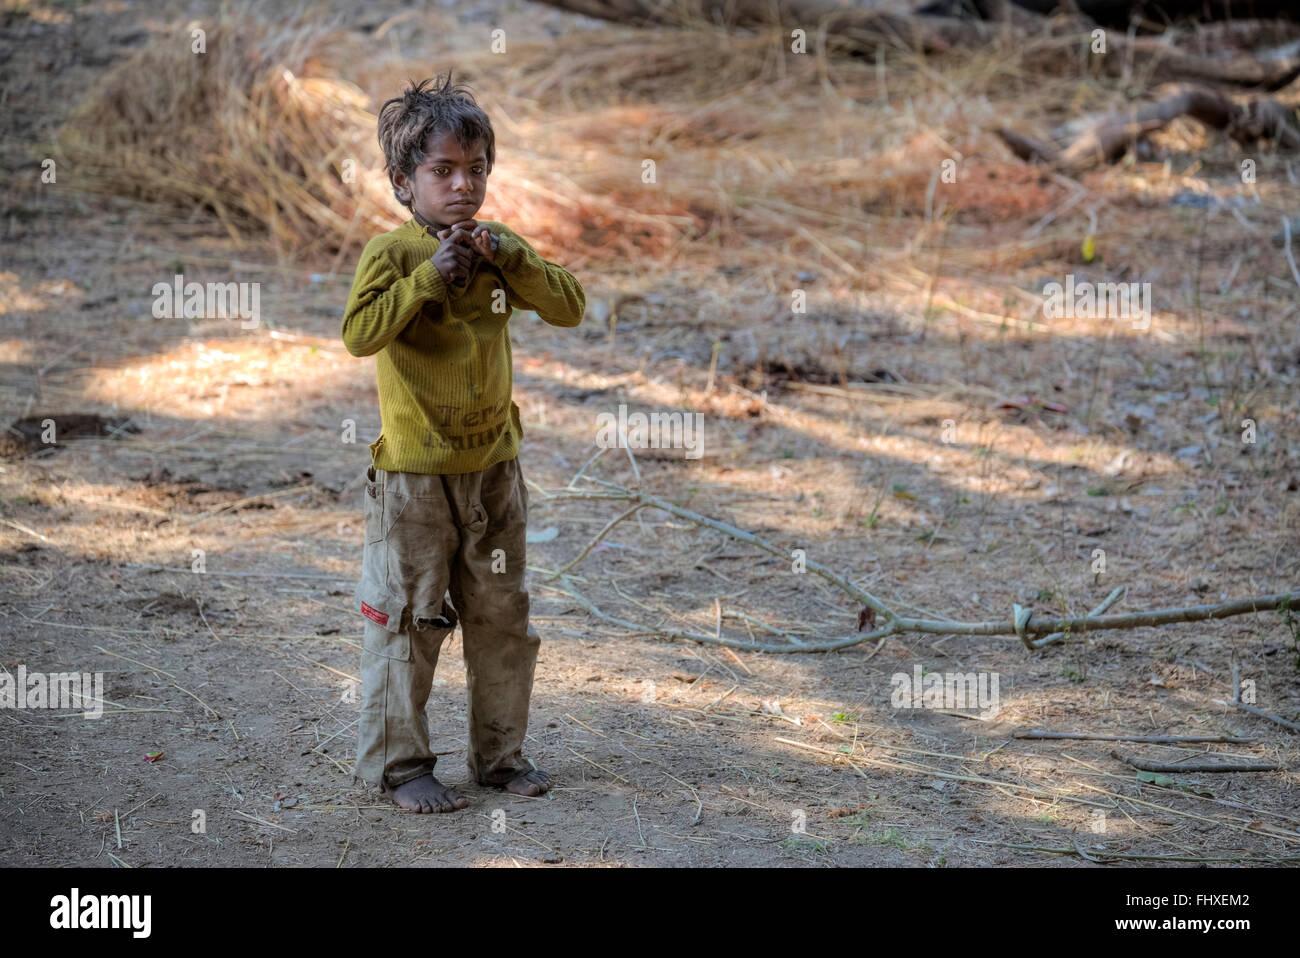 young boy in rural Rajasthan, India Stock Photo